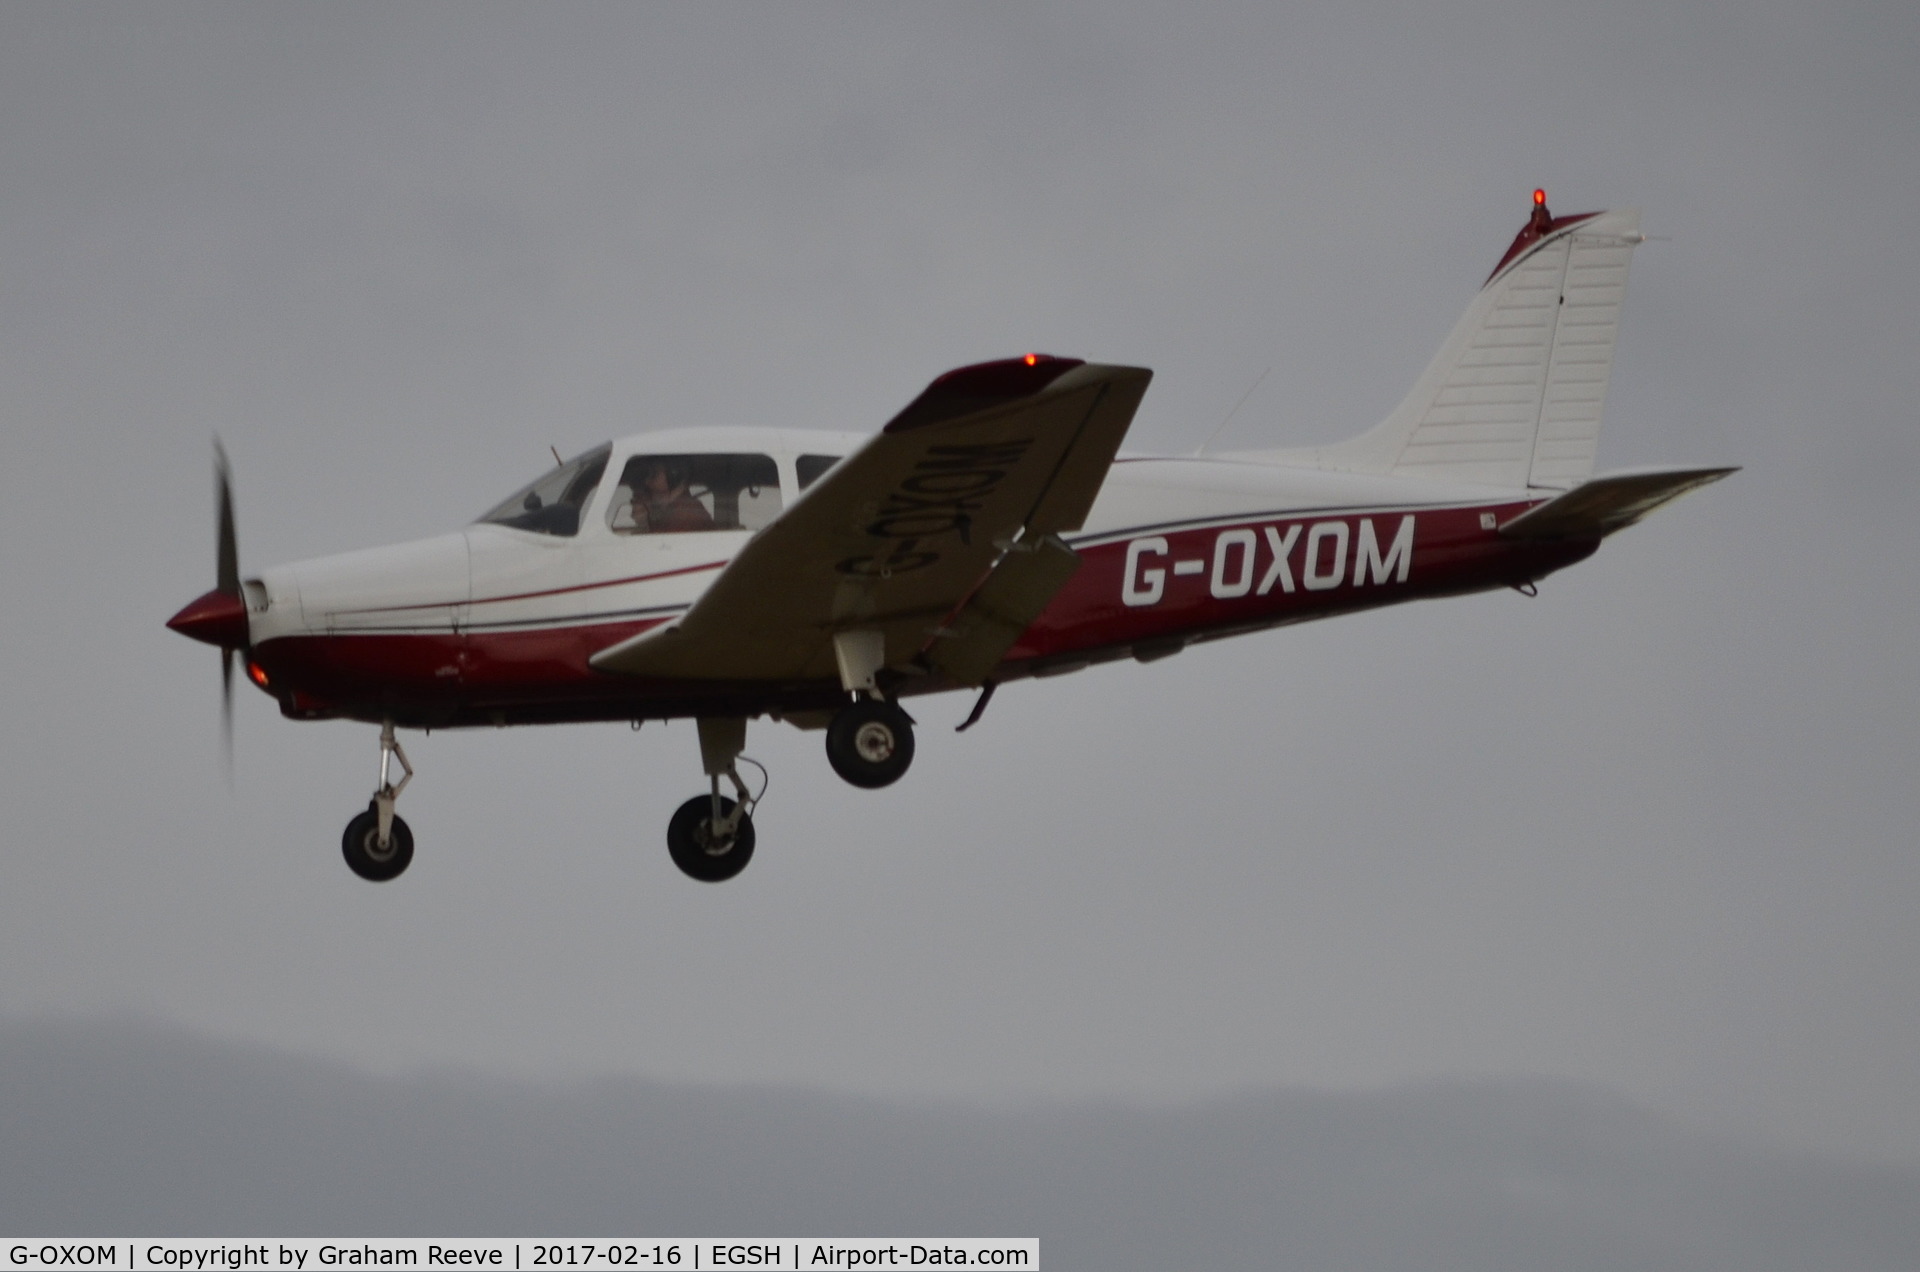 G-OXOM, 1989 Piper PA-28-161 Cadet C/N 28-41285, Landing at Norwich.